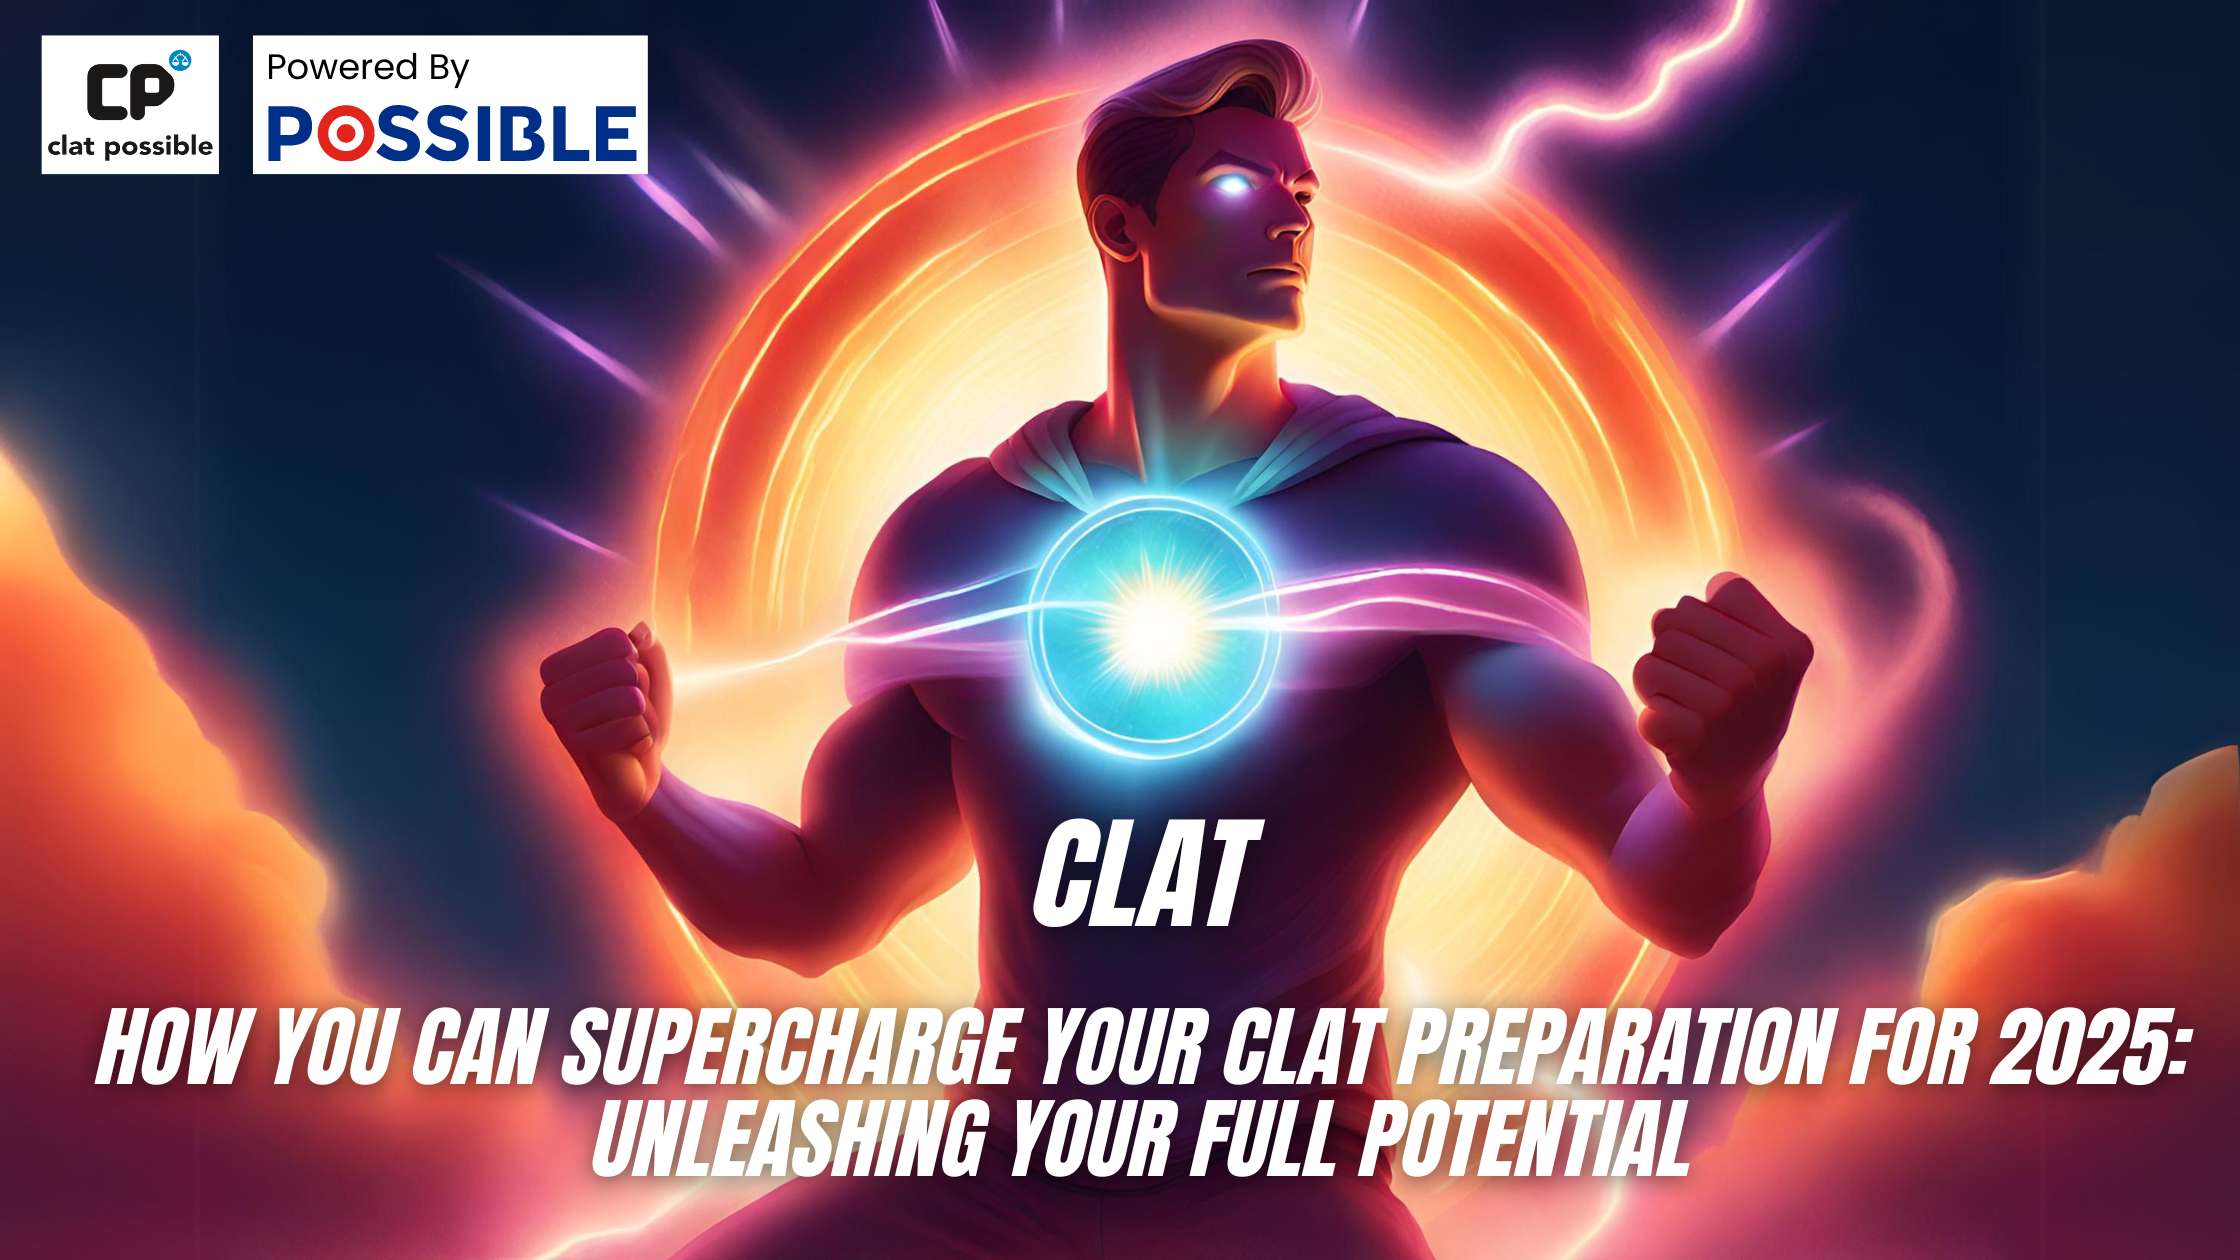 How You Can Supercharge Your CLAT Preparation for 2025: Unleashing Your Full Potential